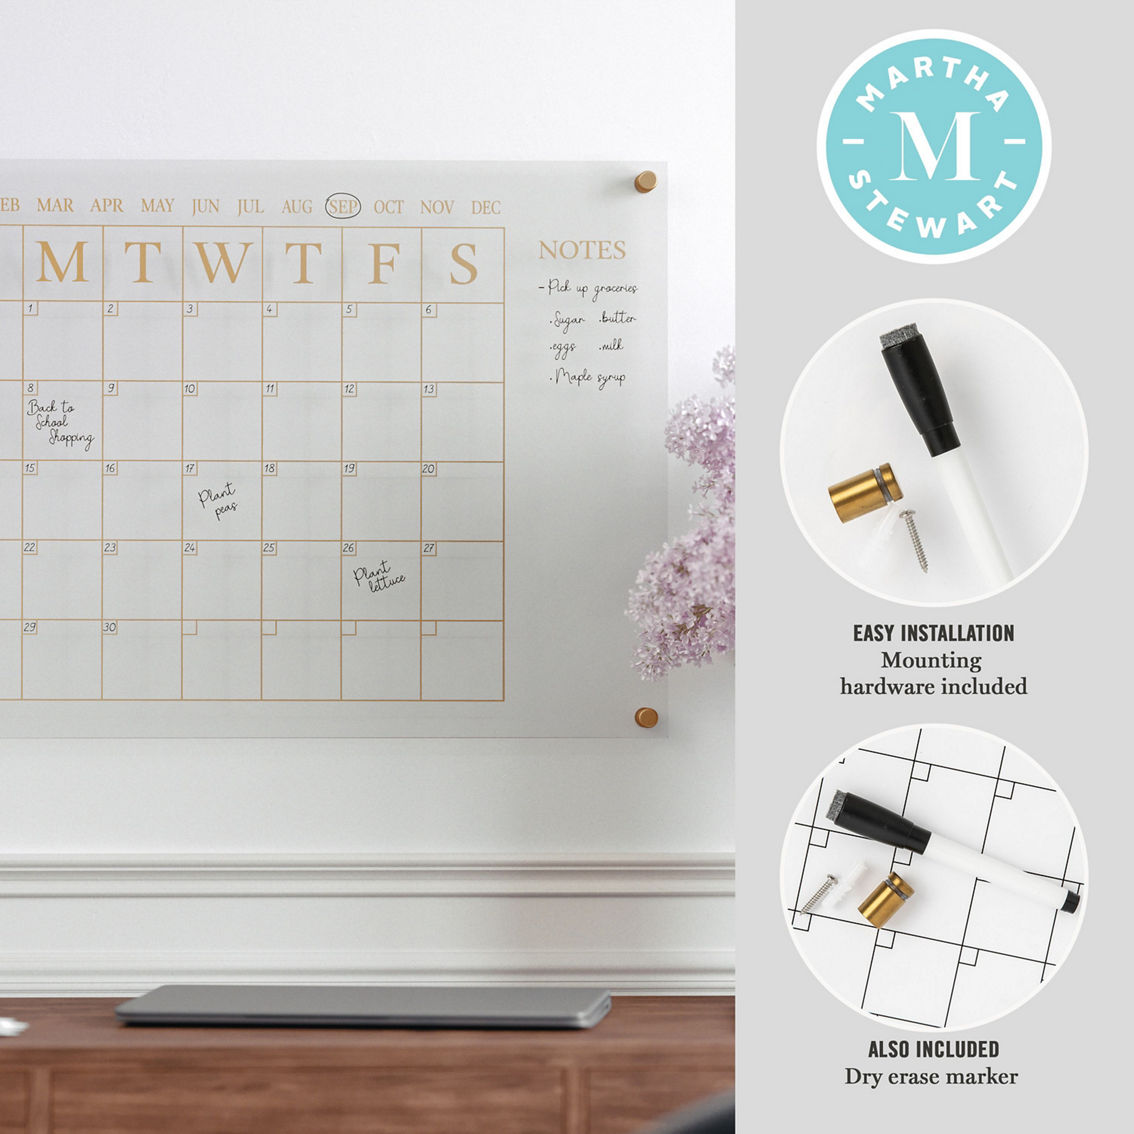 Martha Stewart Acrylic Monthly Wall Calendar with Notes - Image 3 of 5